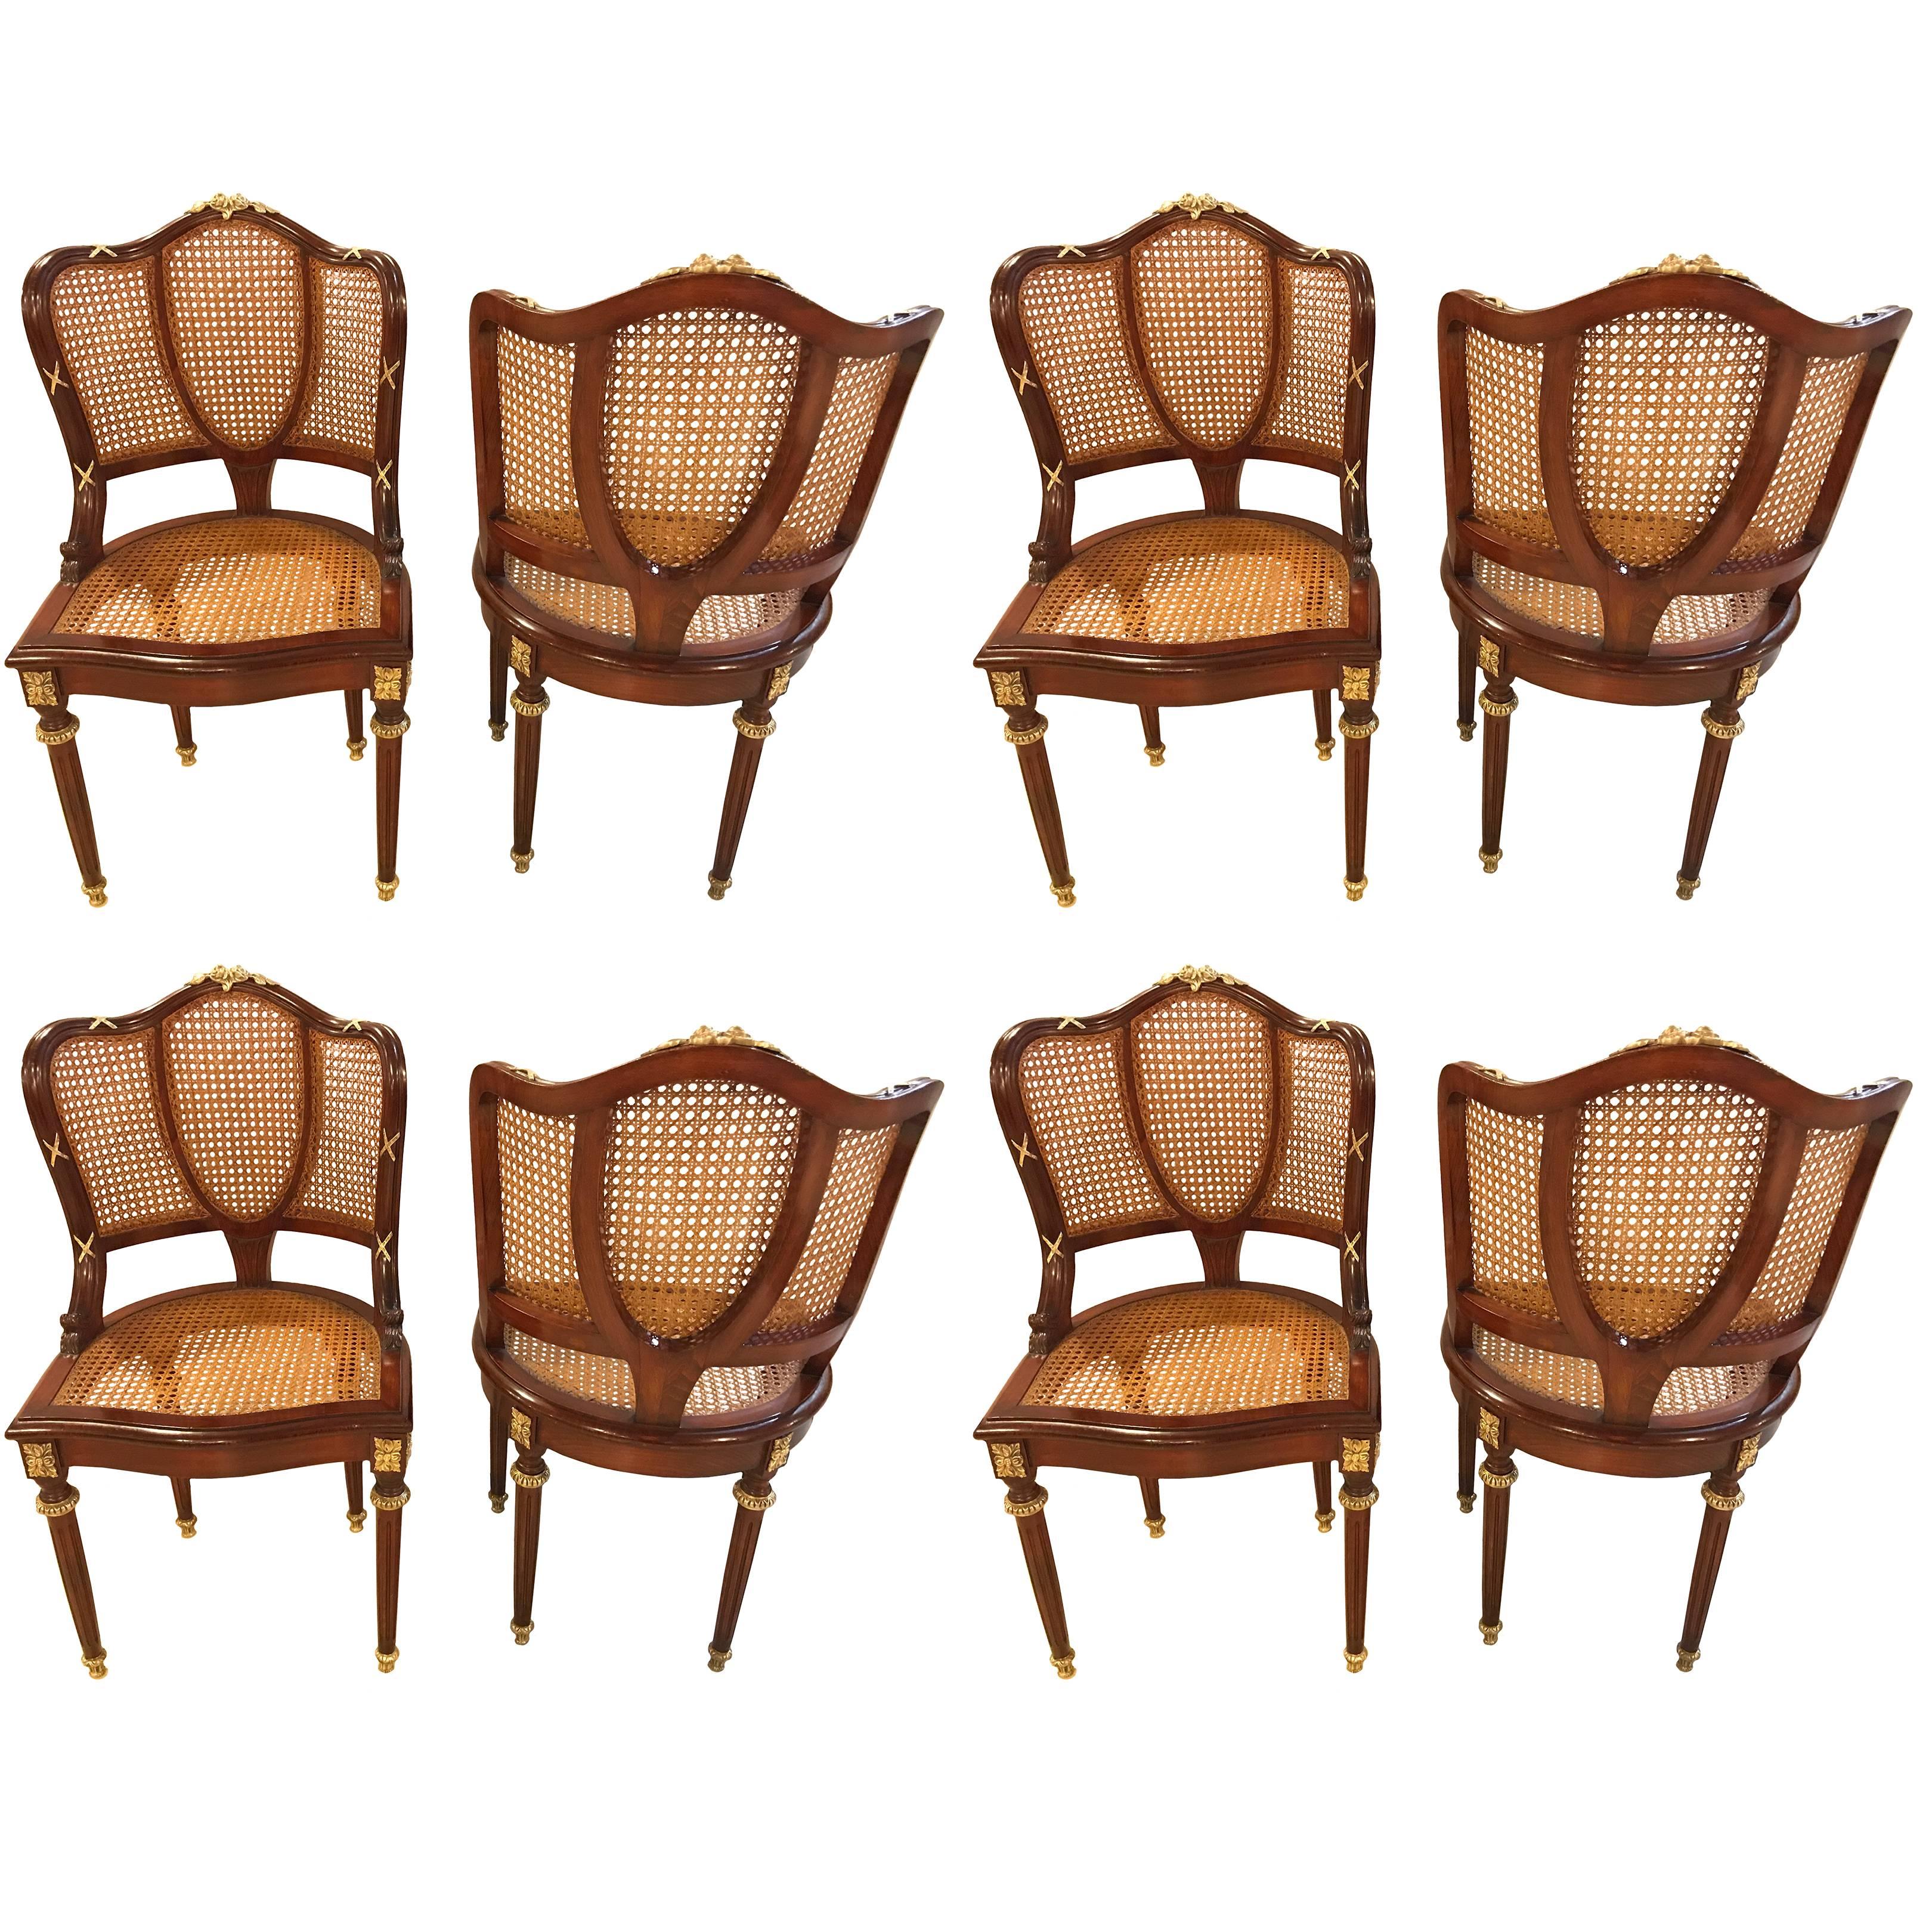 Set of eight fine bronze-mounted Louis XVI style dining chairs. This is a simply magnificent set of Maison Jansen solid mahogany dining chairs each having all-over bronze mounts. The entire set having recently been cleaned and the wood French